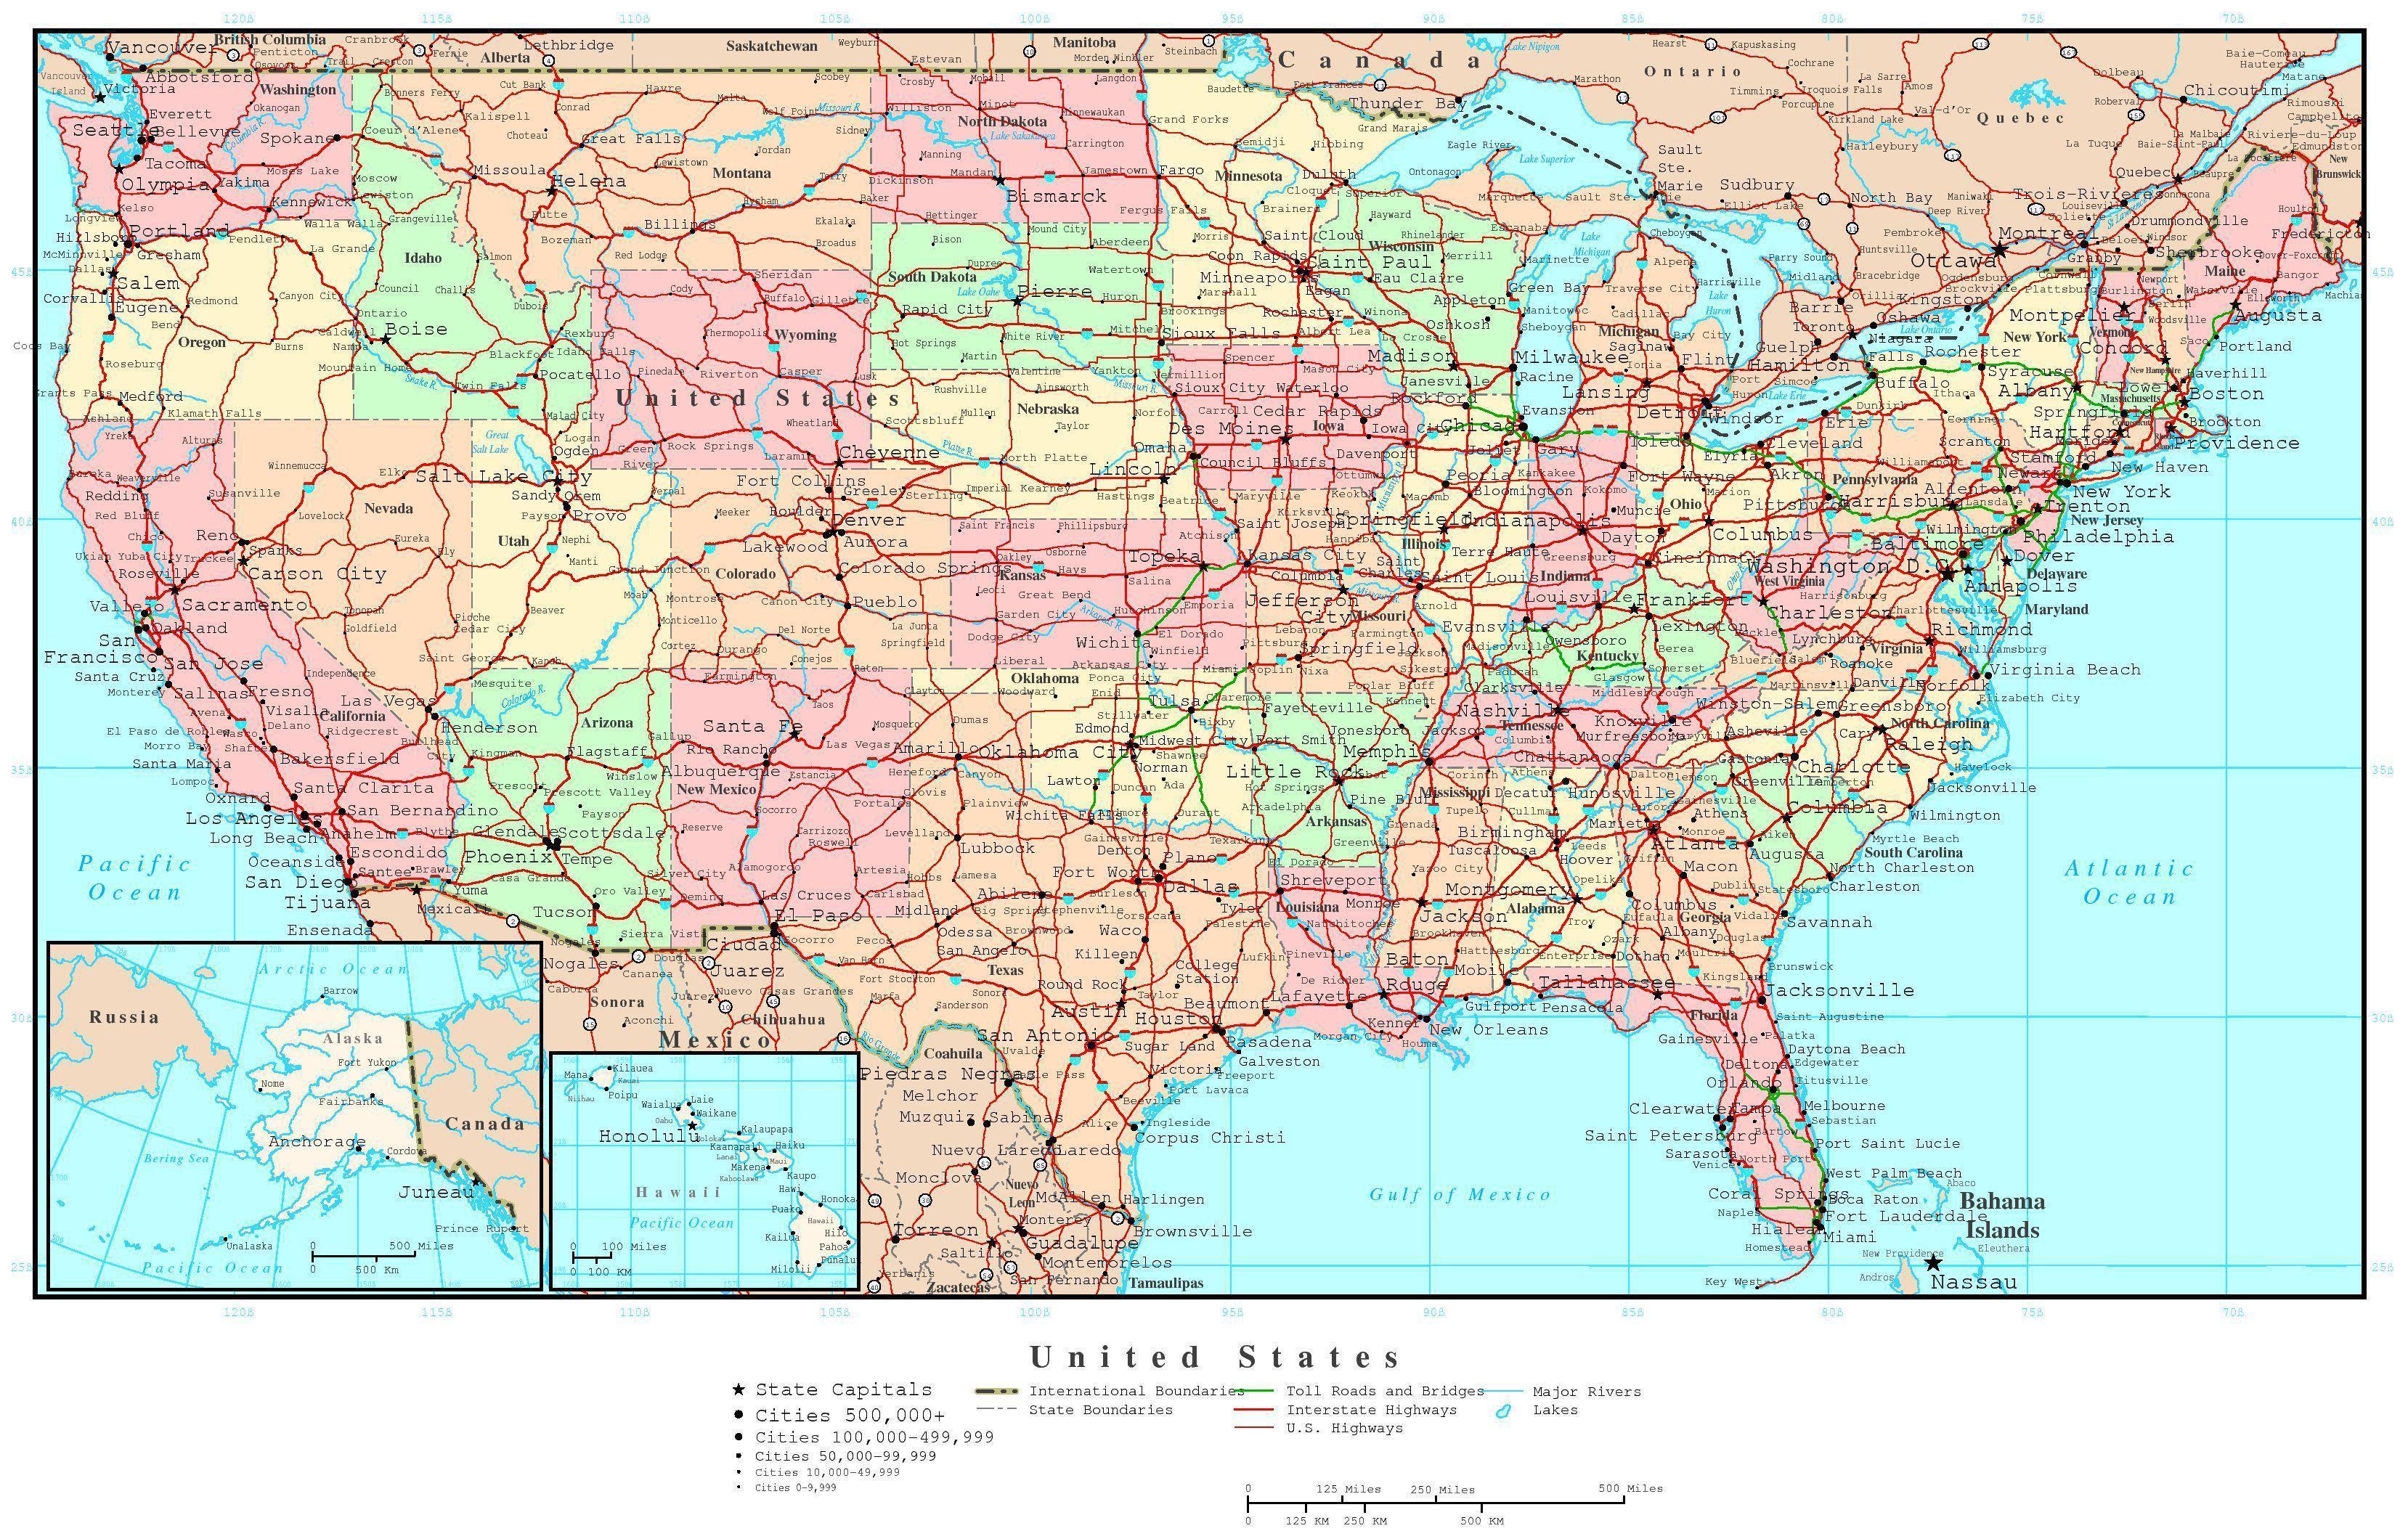 United States Of America Map HD Wallpaper. Background